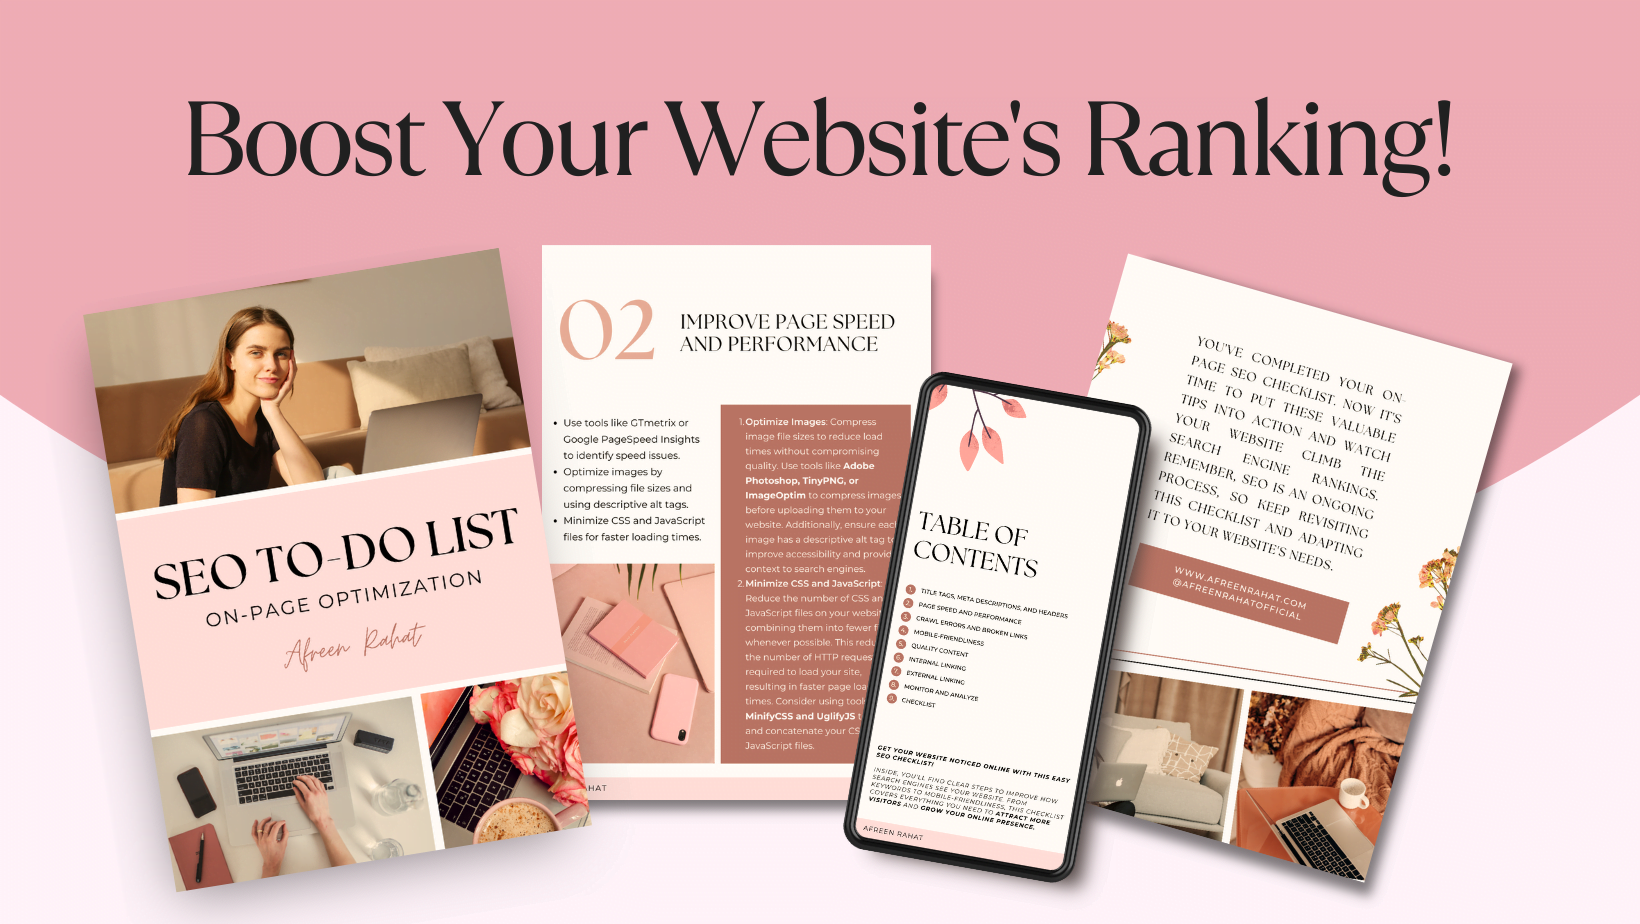 Boost Your Website’s Ranking! FREE SEO Checklist